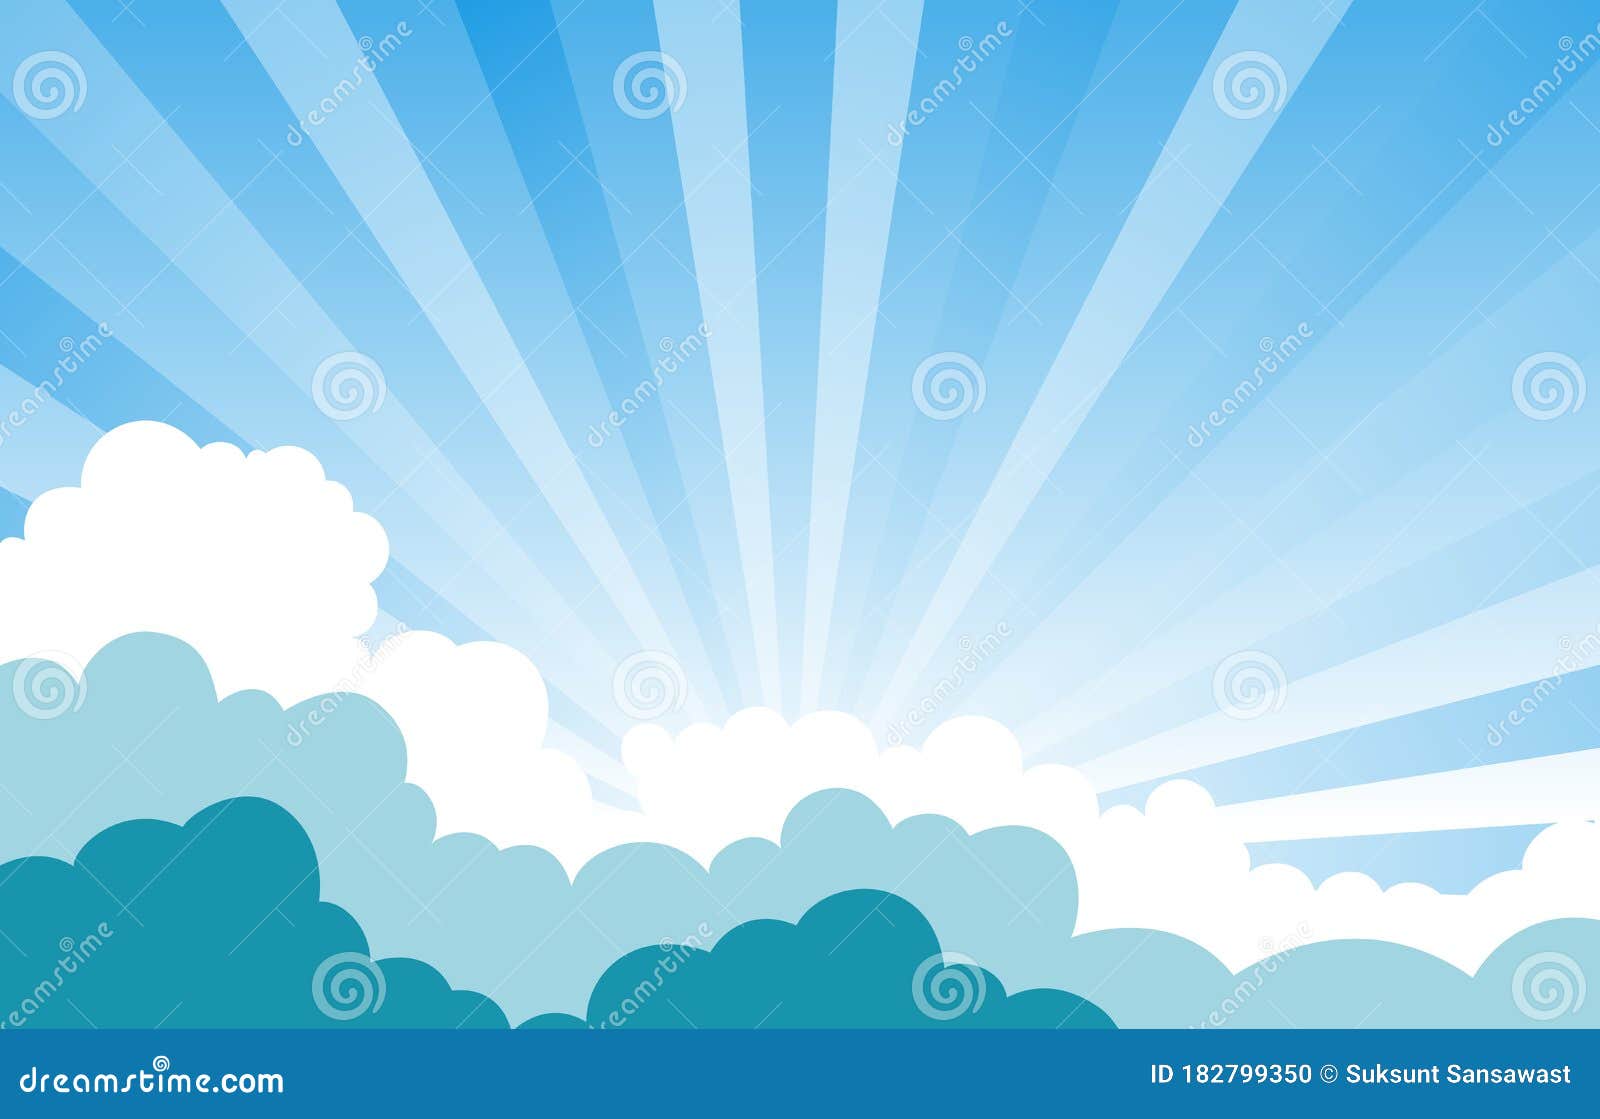 Blue Sky and Sun Rays with Clouds . Blue Green Cloud Background  Illustration Stock Vector - Illustration of morning, shadow: 182799350